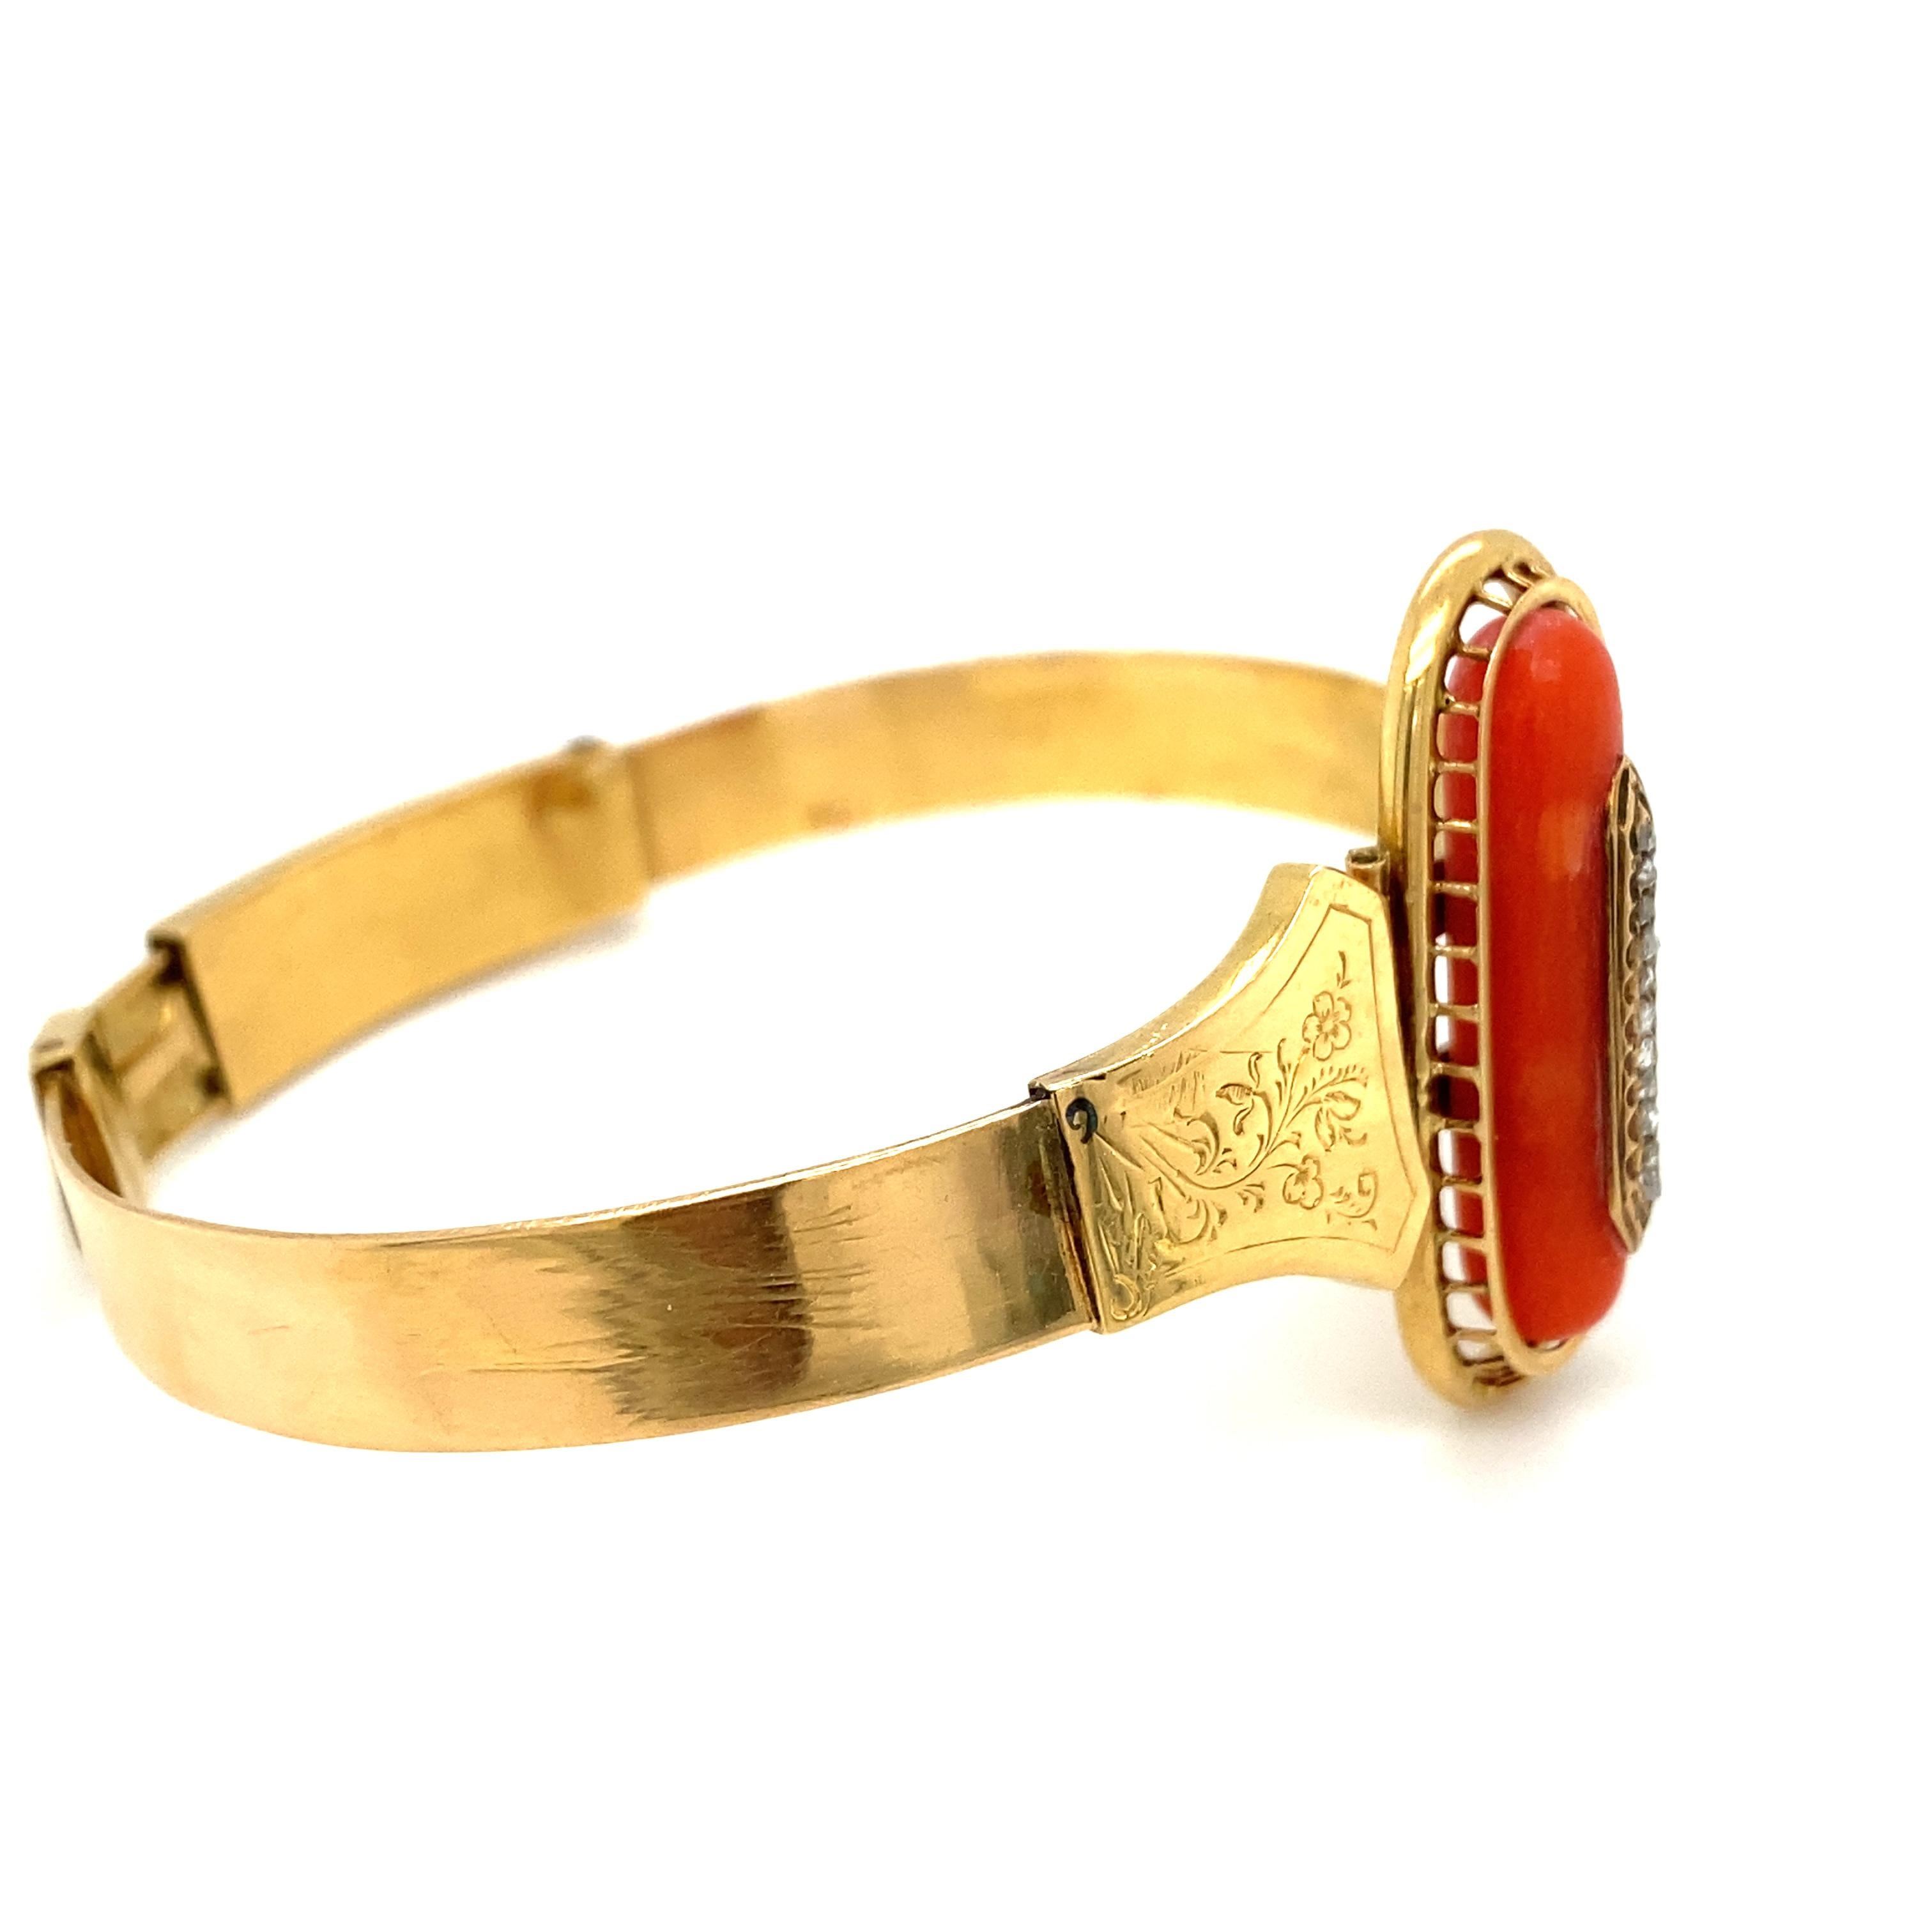 Circa 1890s Victorian Coral and Diamond Bracelet in 14 Karat Gold For Sale 1